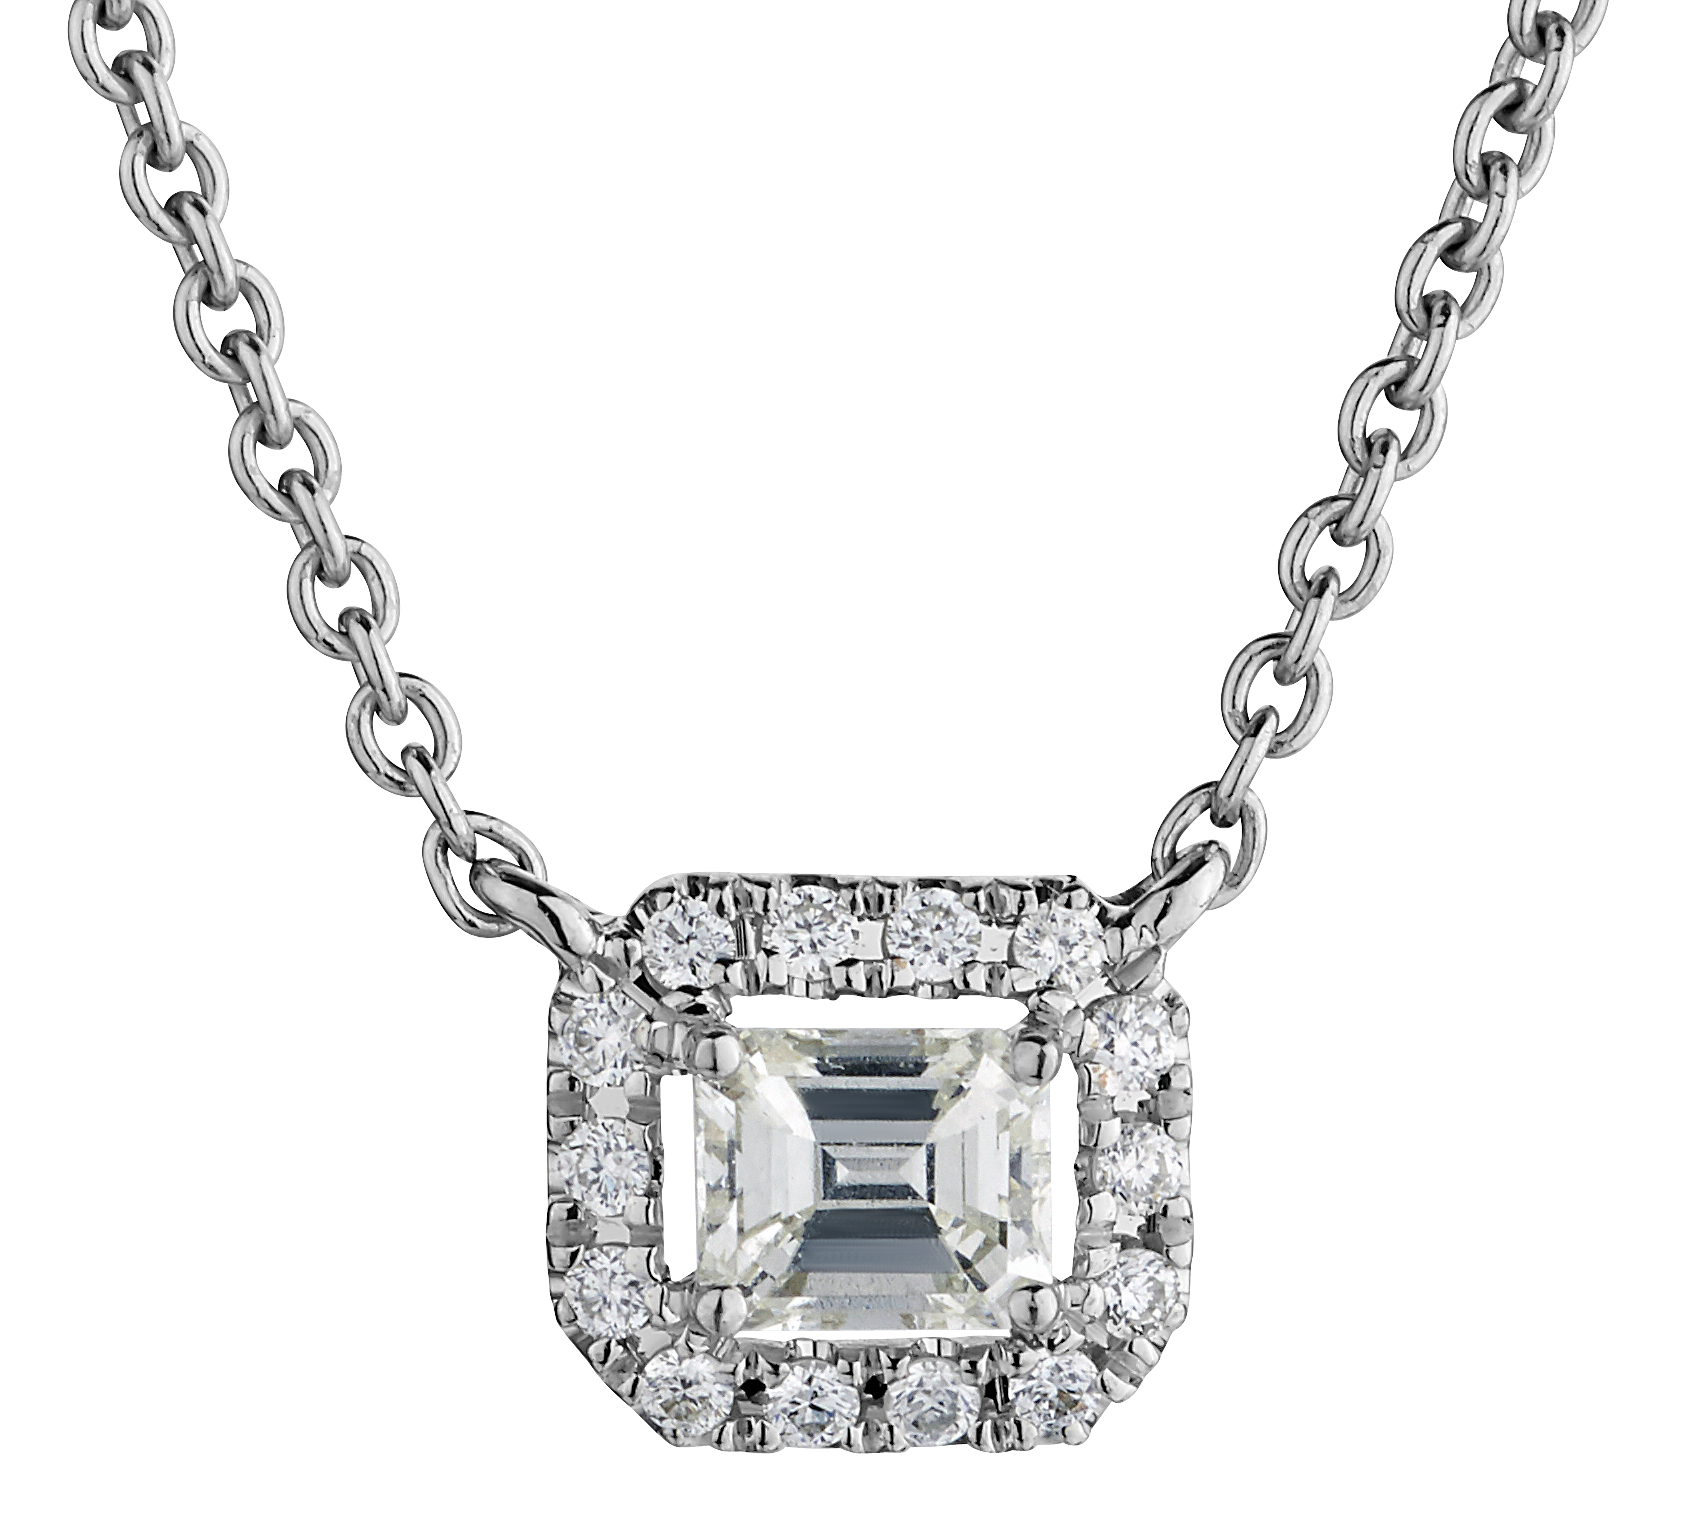 .25 Carat Total Weight (.18 Carat Emerald Cut + 0.7 Round Diamonds),  18kt White Gold.  Necklaces and Pendants. Griffin Jewellery Designs.